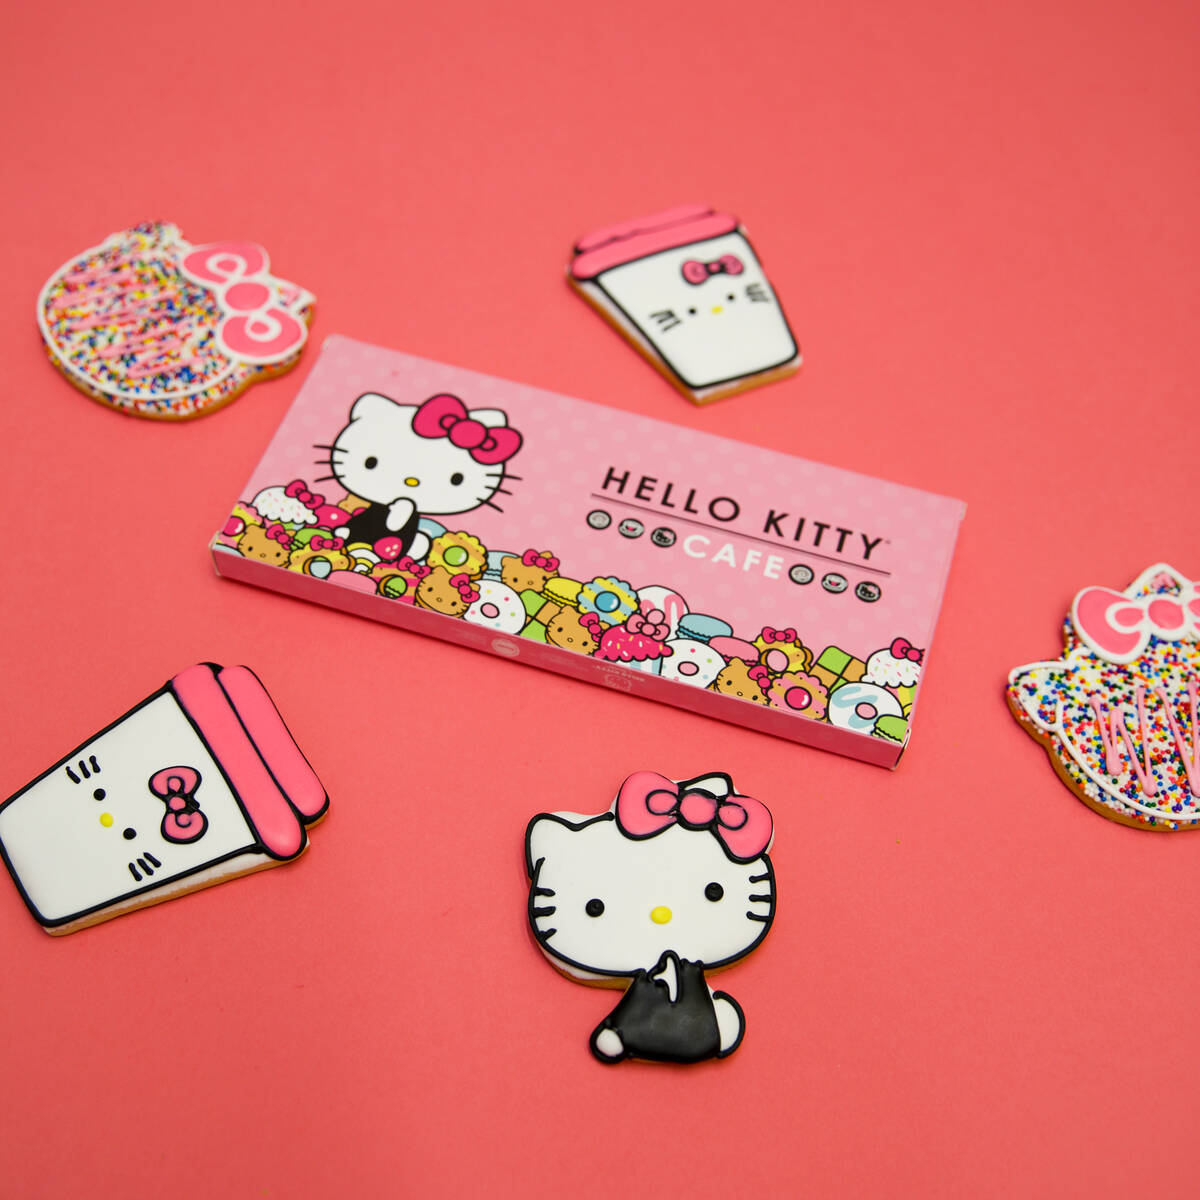 The Hello Kitty Cafe Truck pop-up serves treats and exclusive merchandise. (Hello Kitty Cafe Truck)